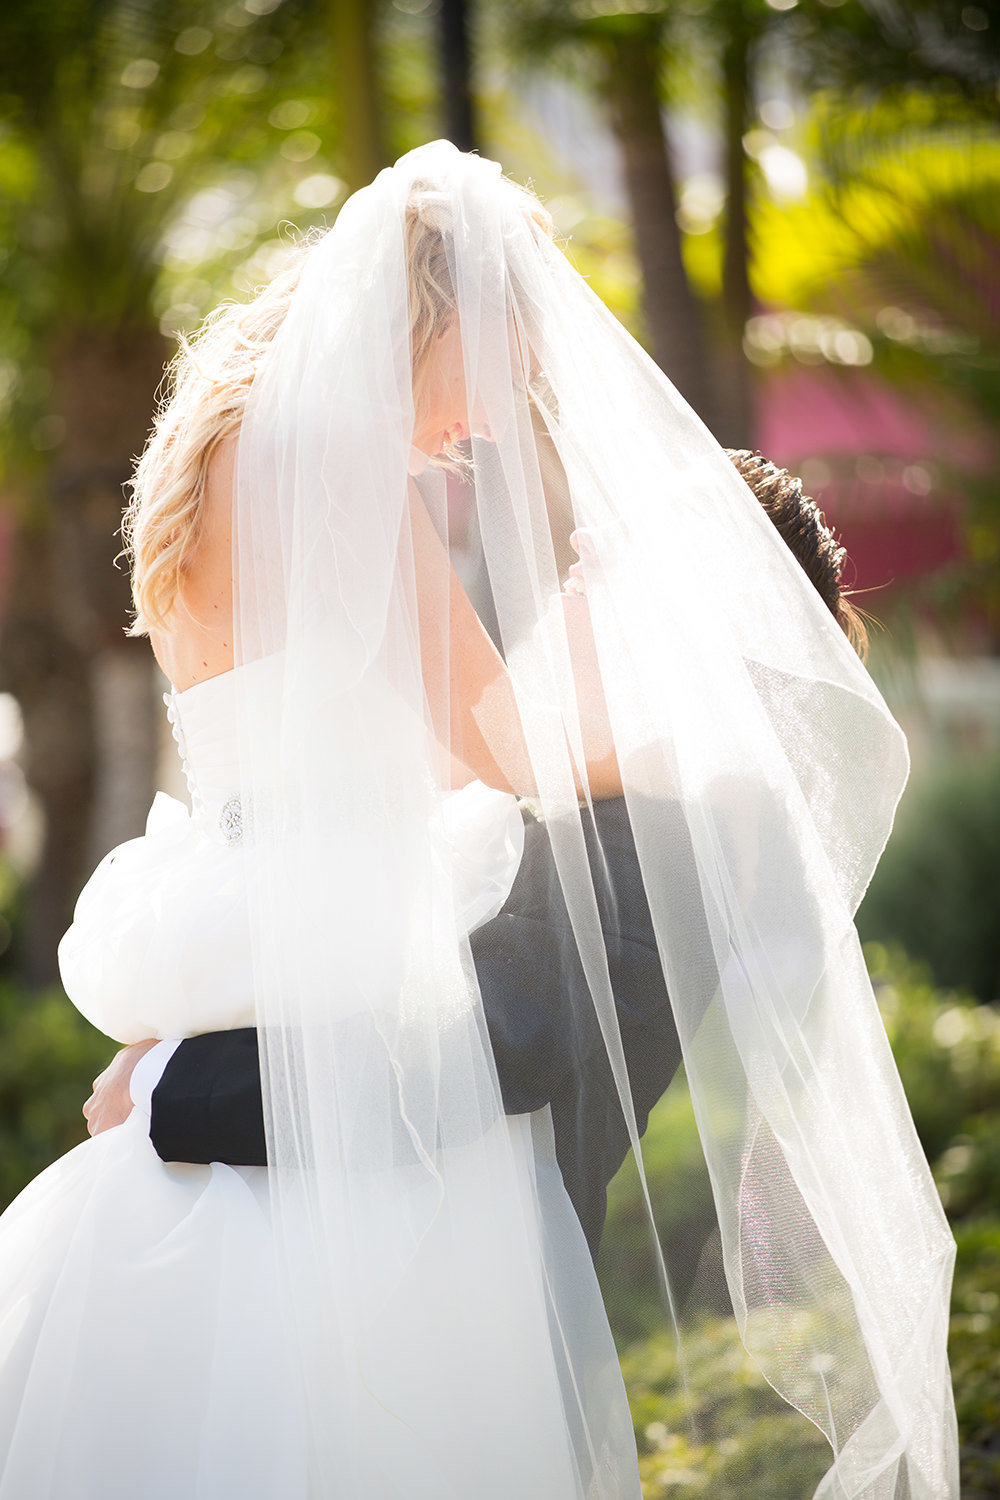 Great moment of groom lifting the bride with flowing veil